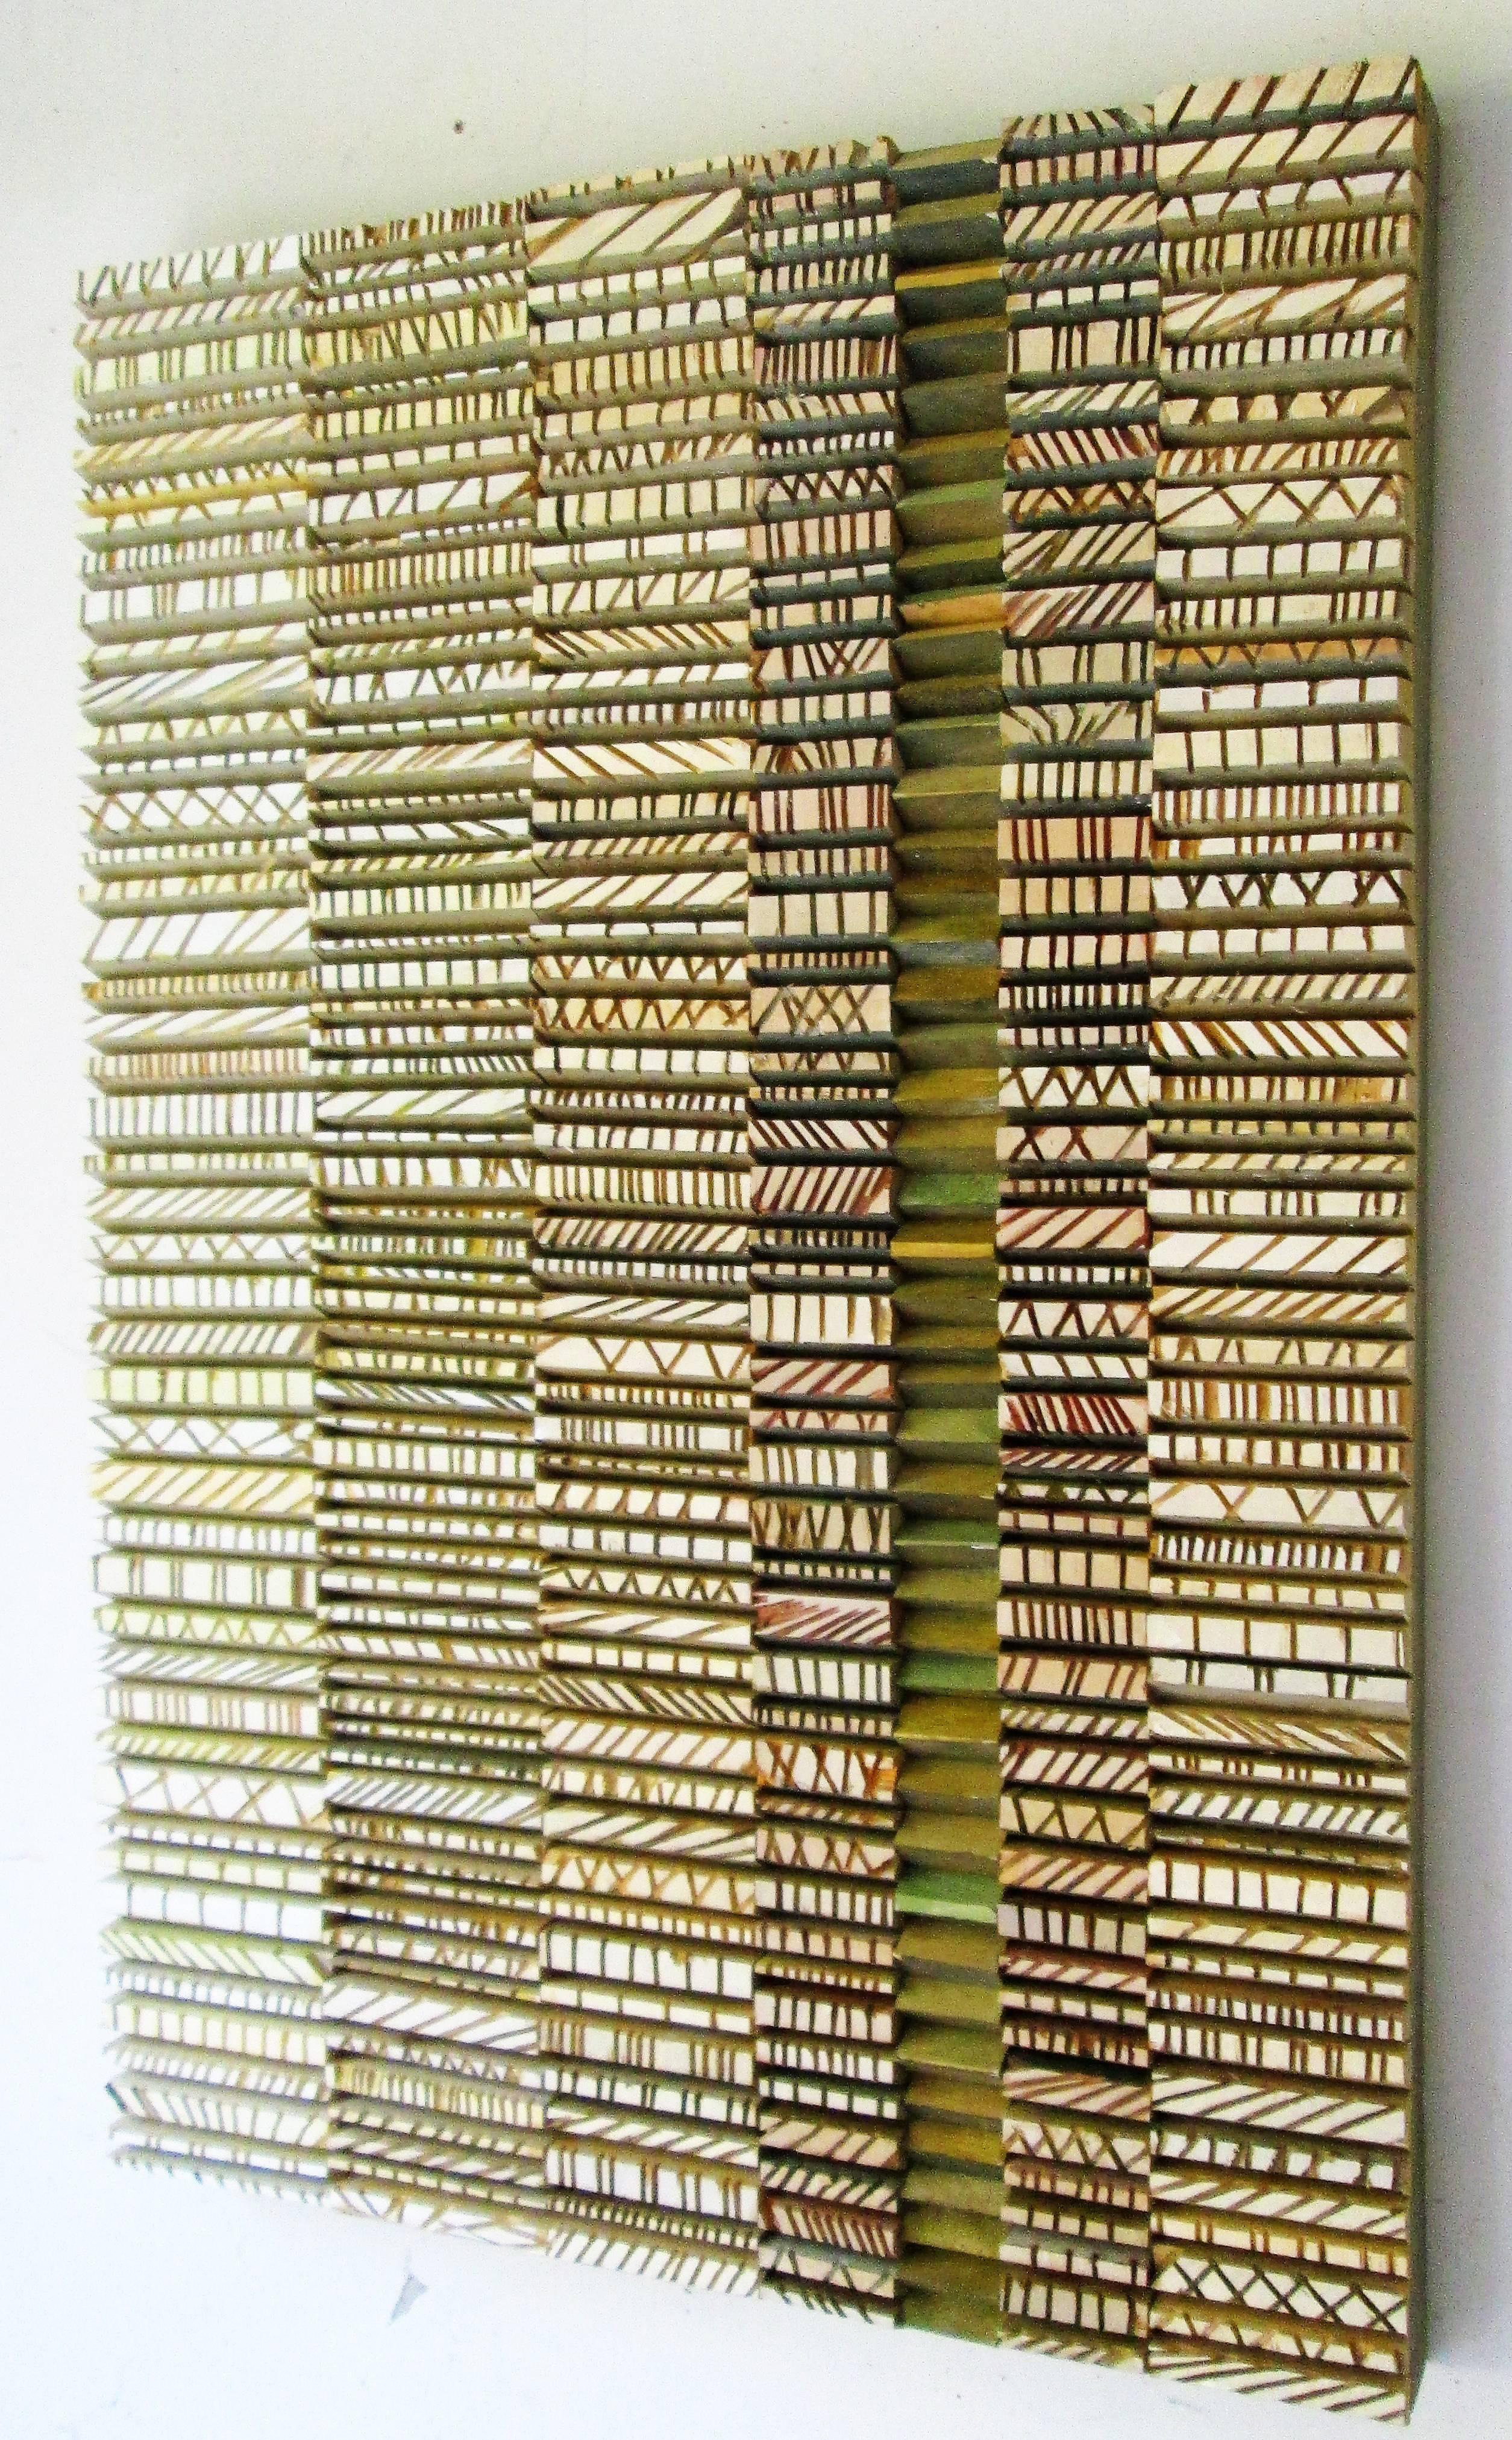 Todoro (Abstract, Three-Dimensional Wood Wall Sculpture in Green & White) - Mixed Media Art by Stephen Walling